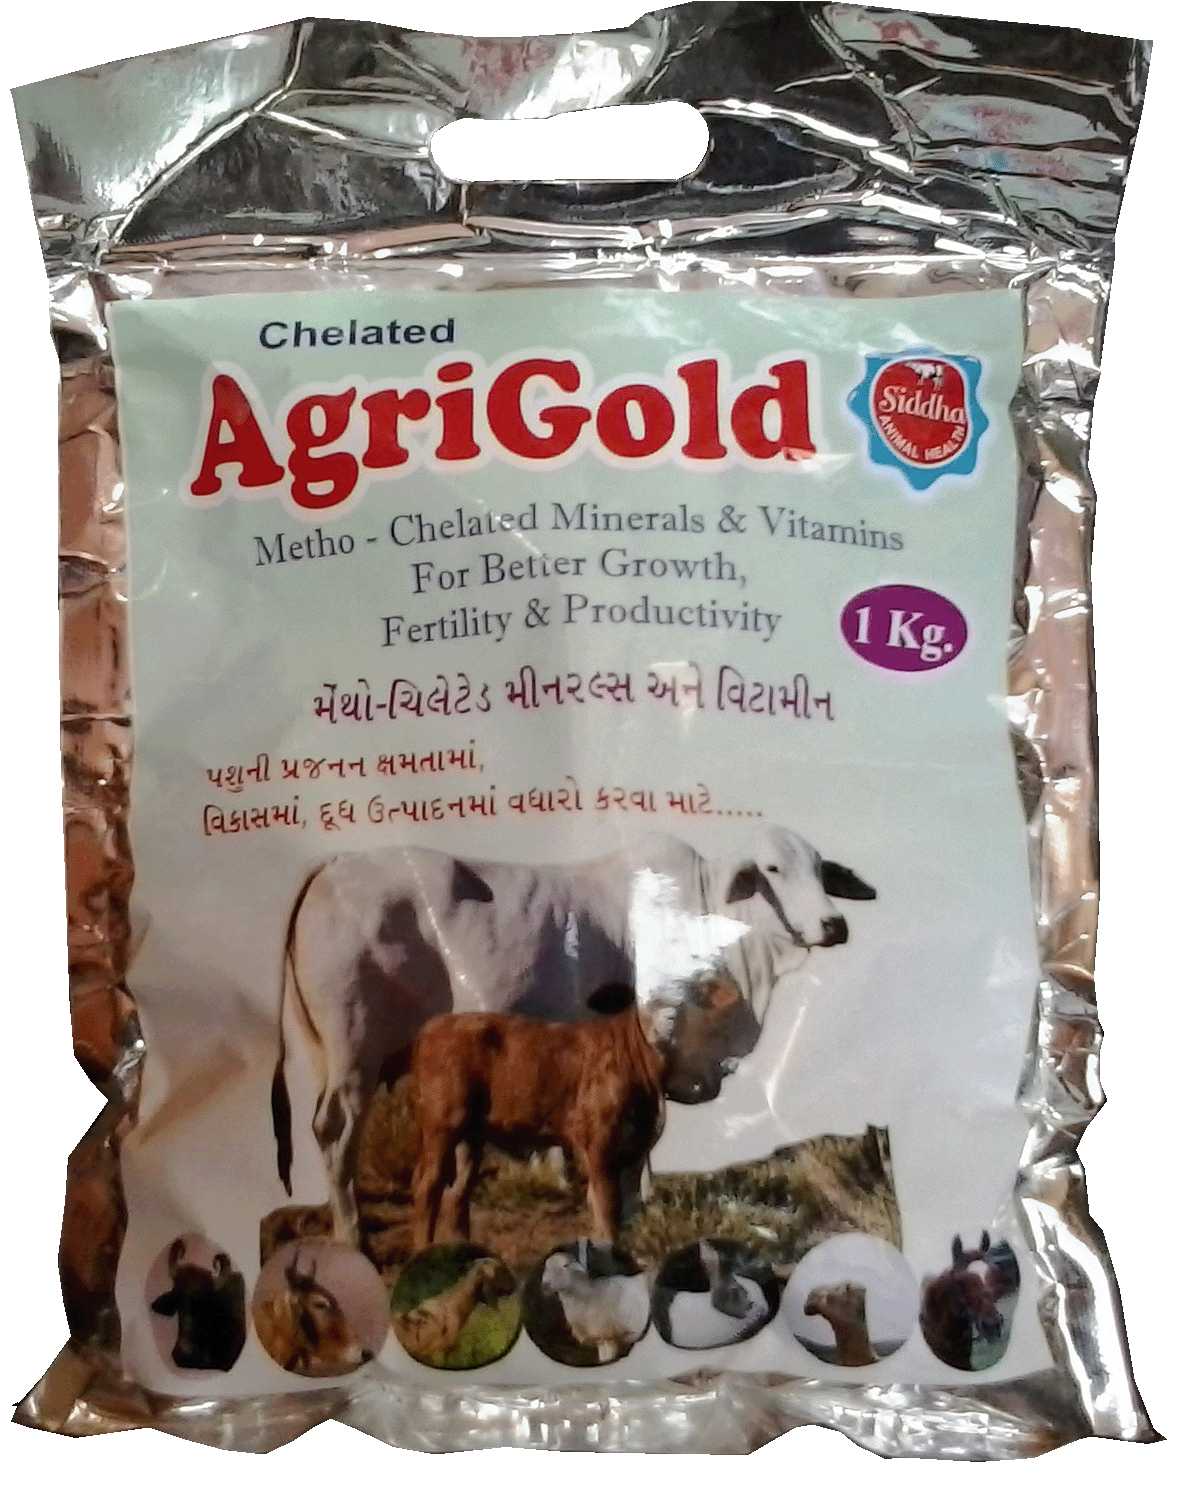 Chelated Agri Gold